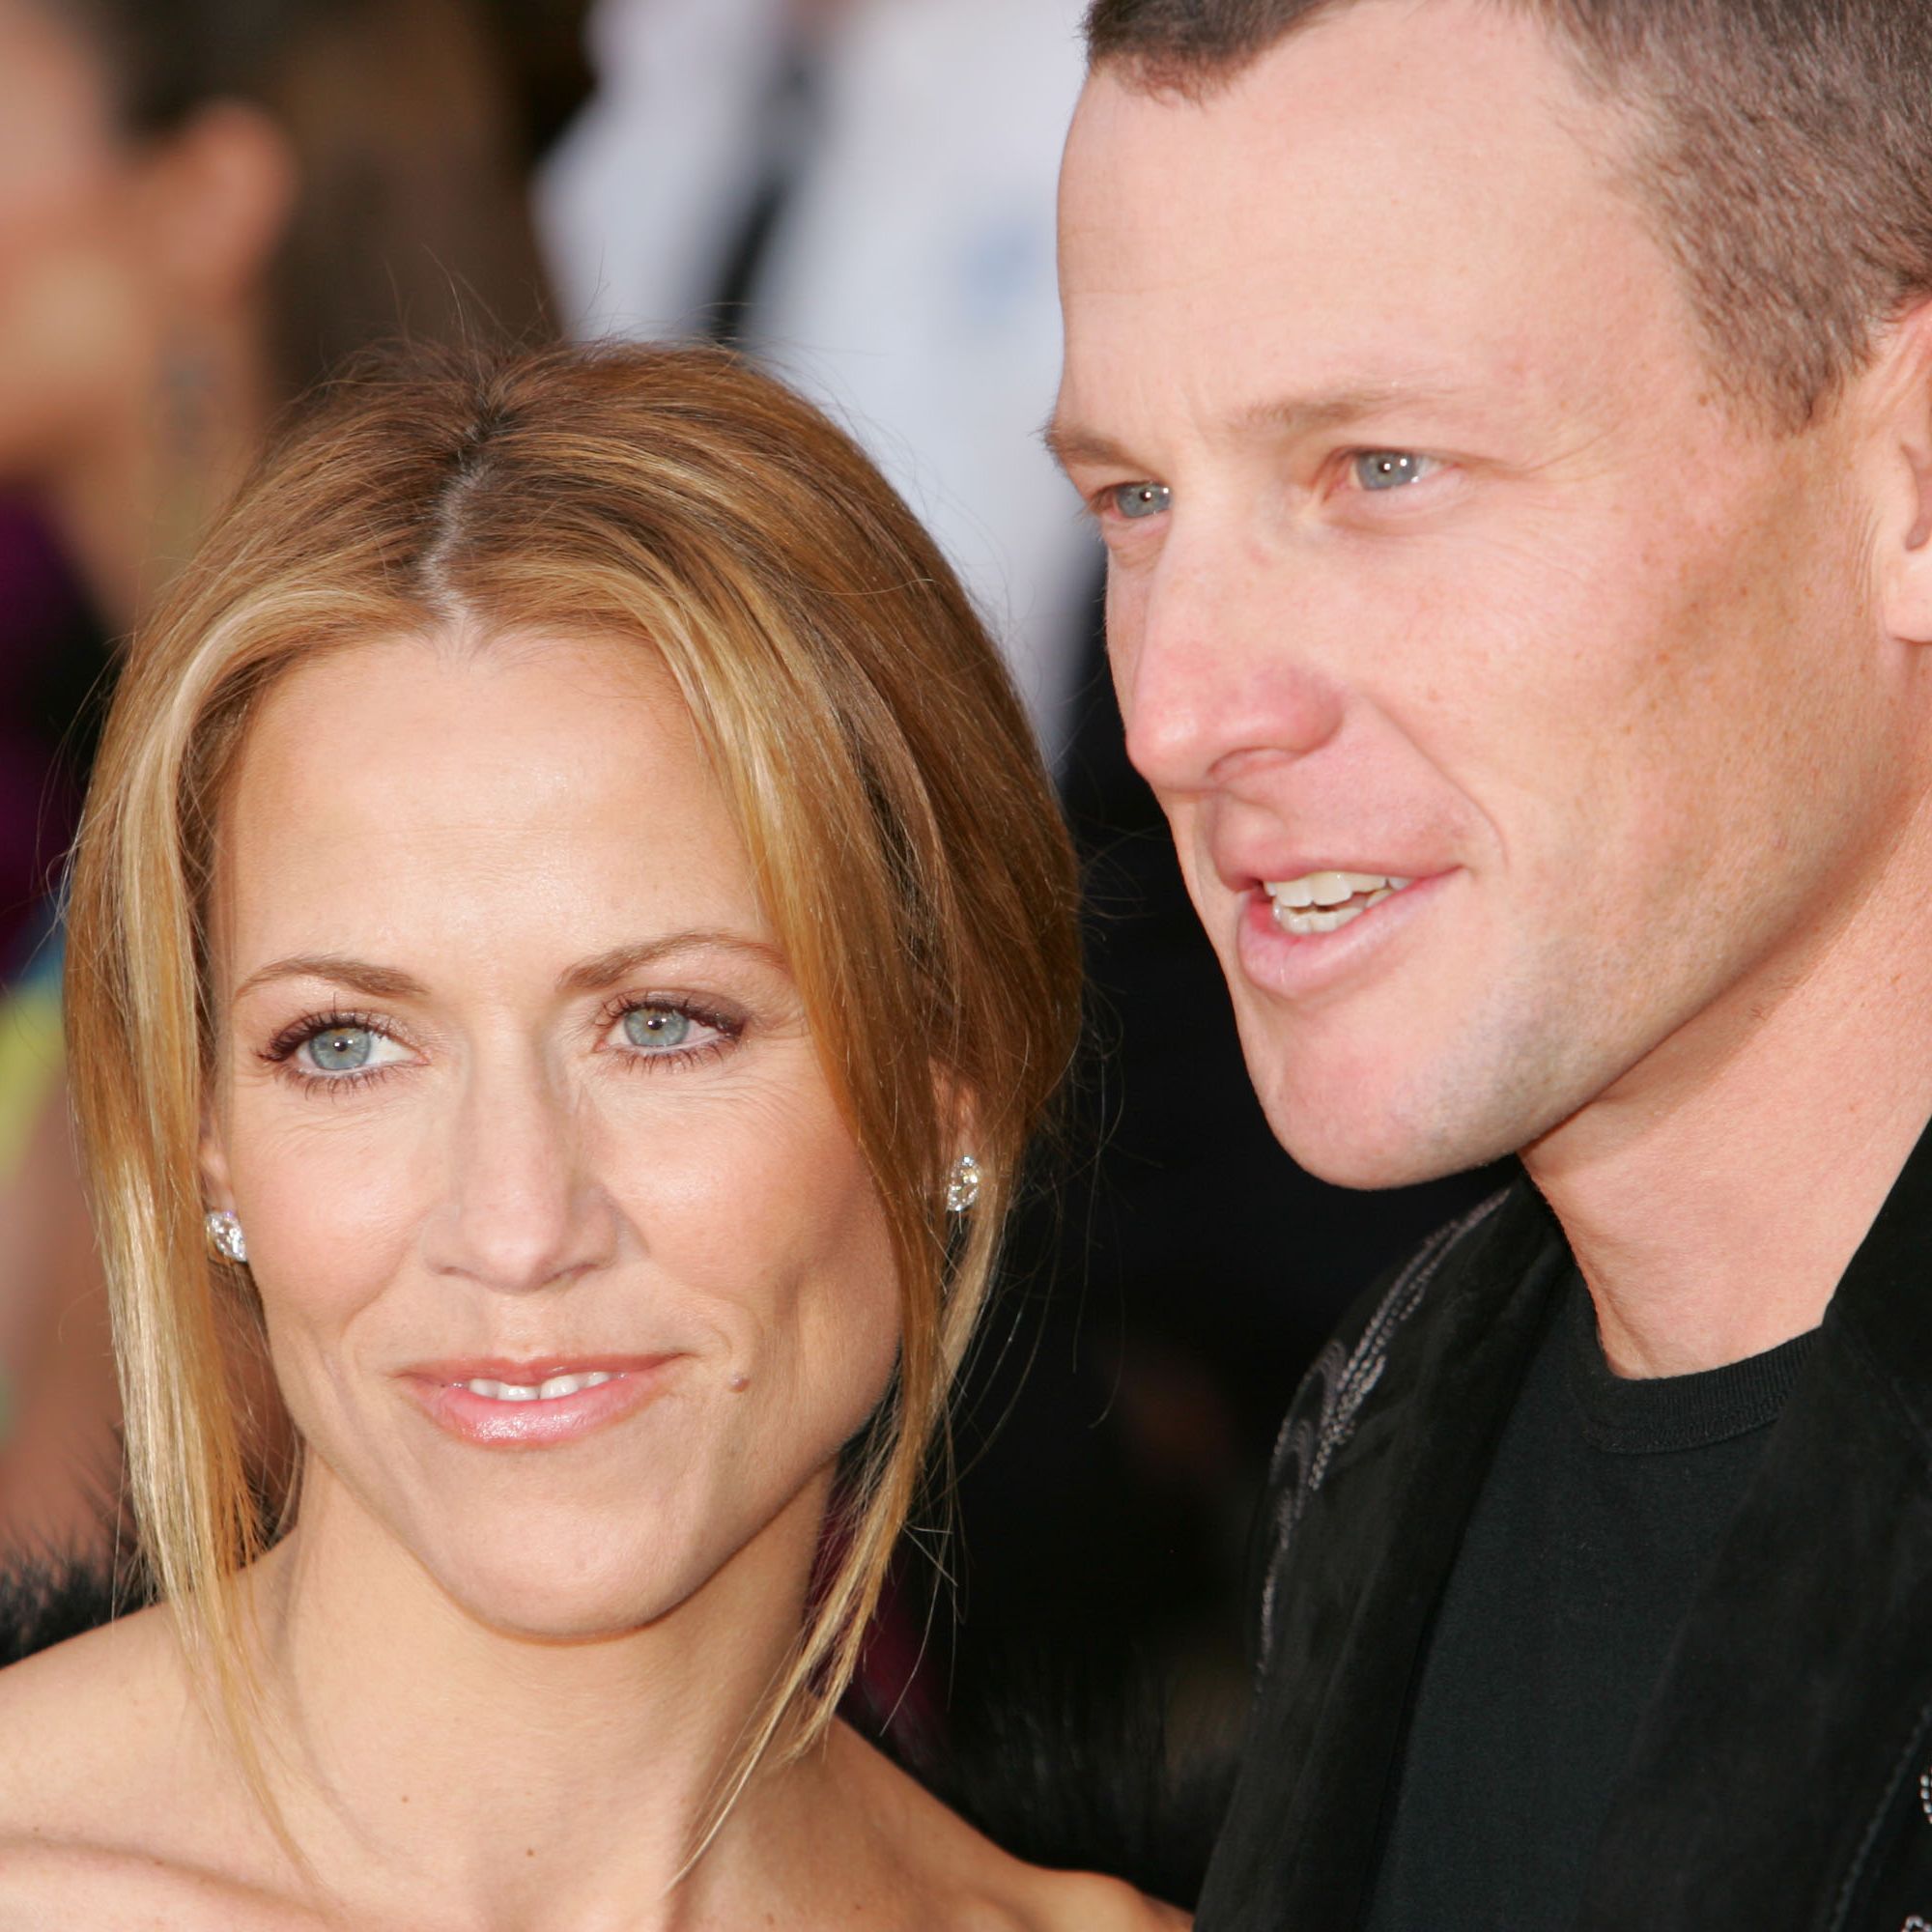 Lance Armstrong Porn Star - Did Sheryl Crow Know About Lance Armstrong Doping? | Marie Claire